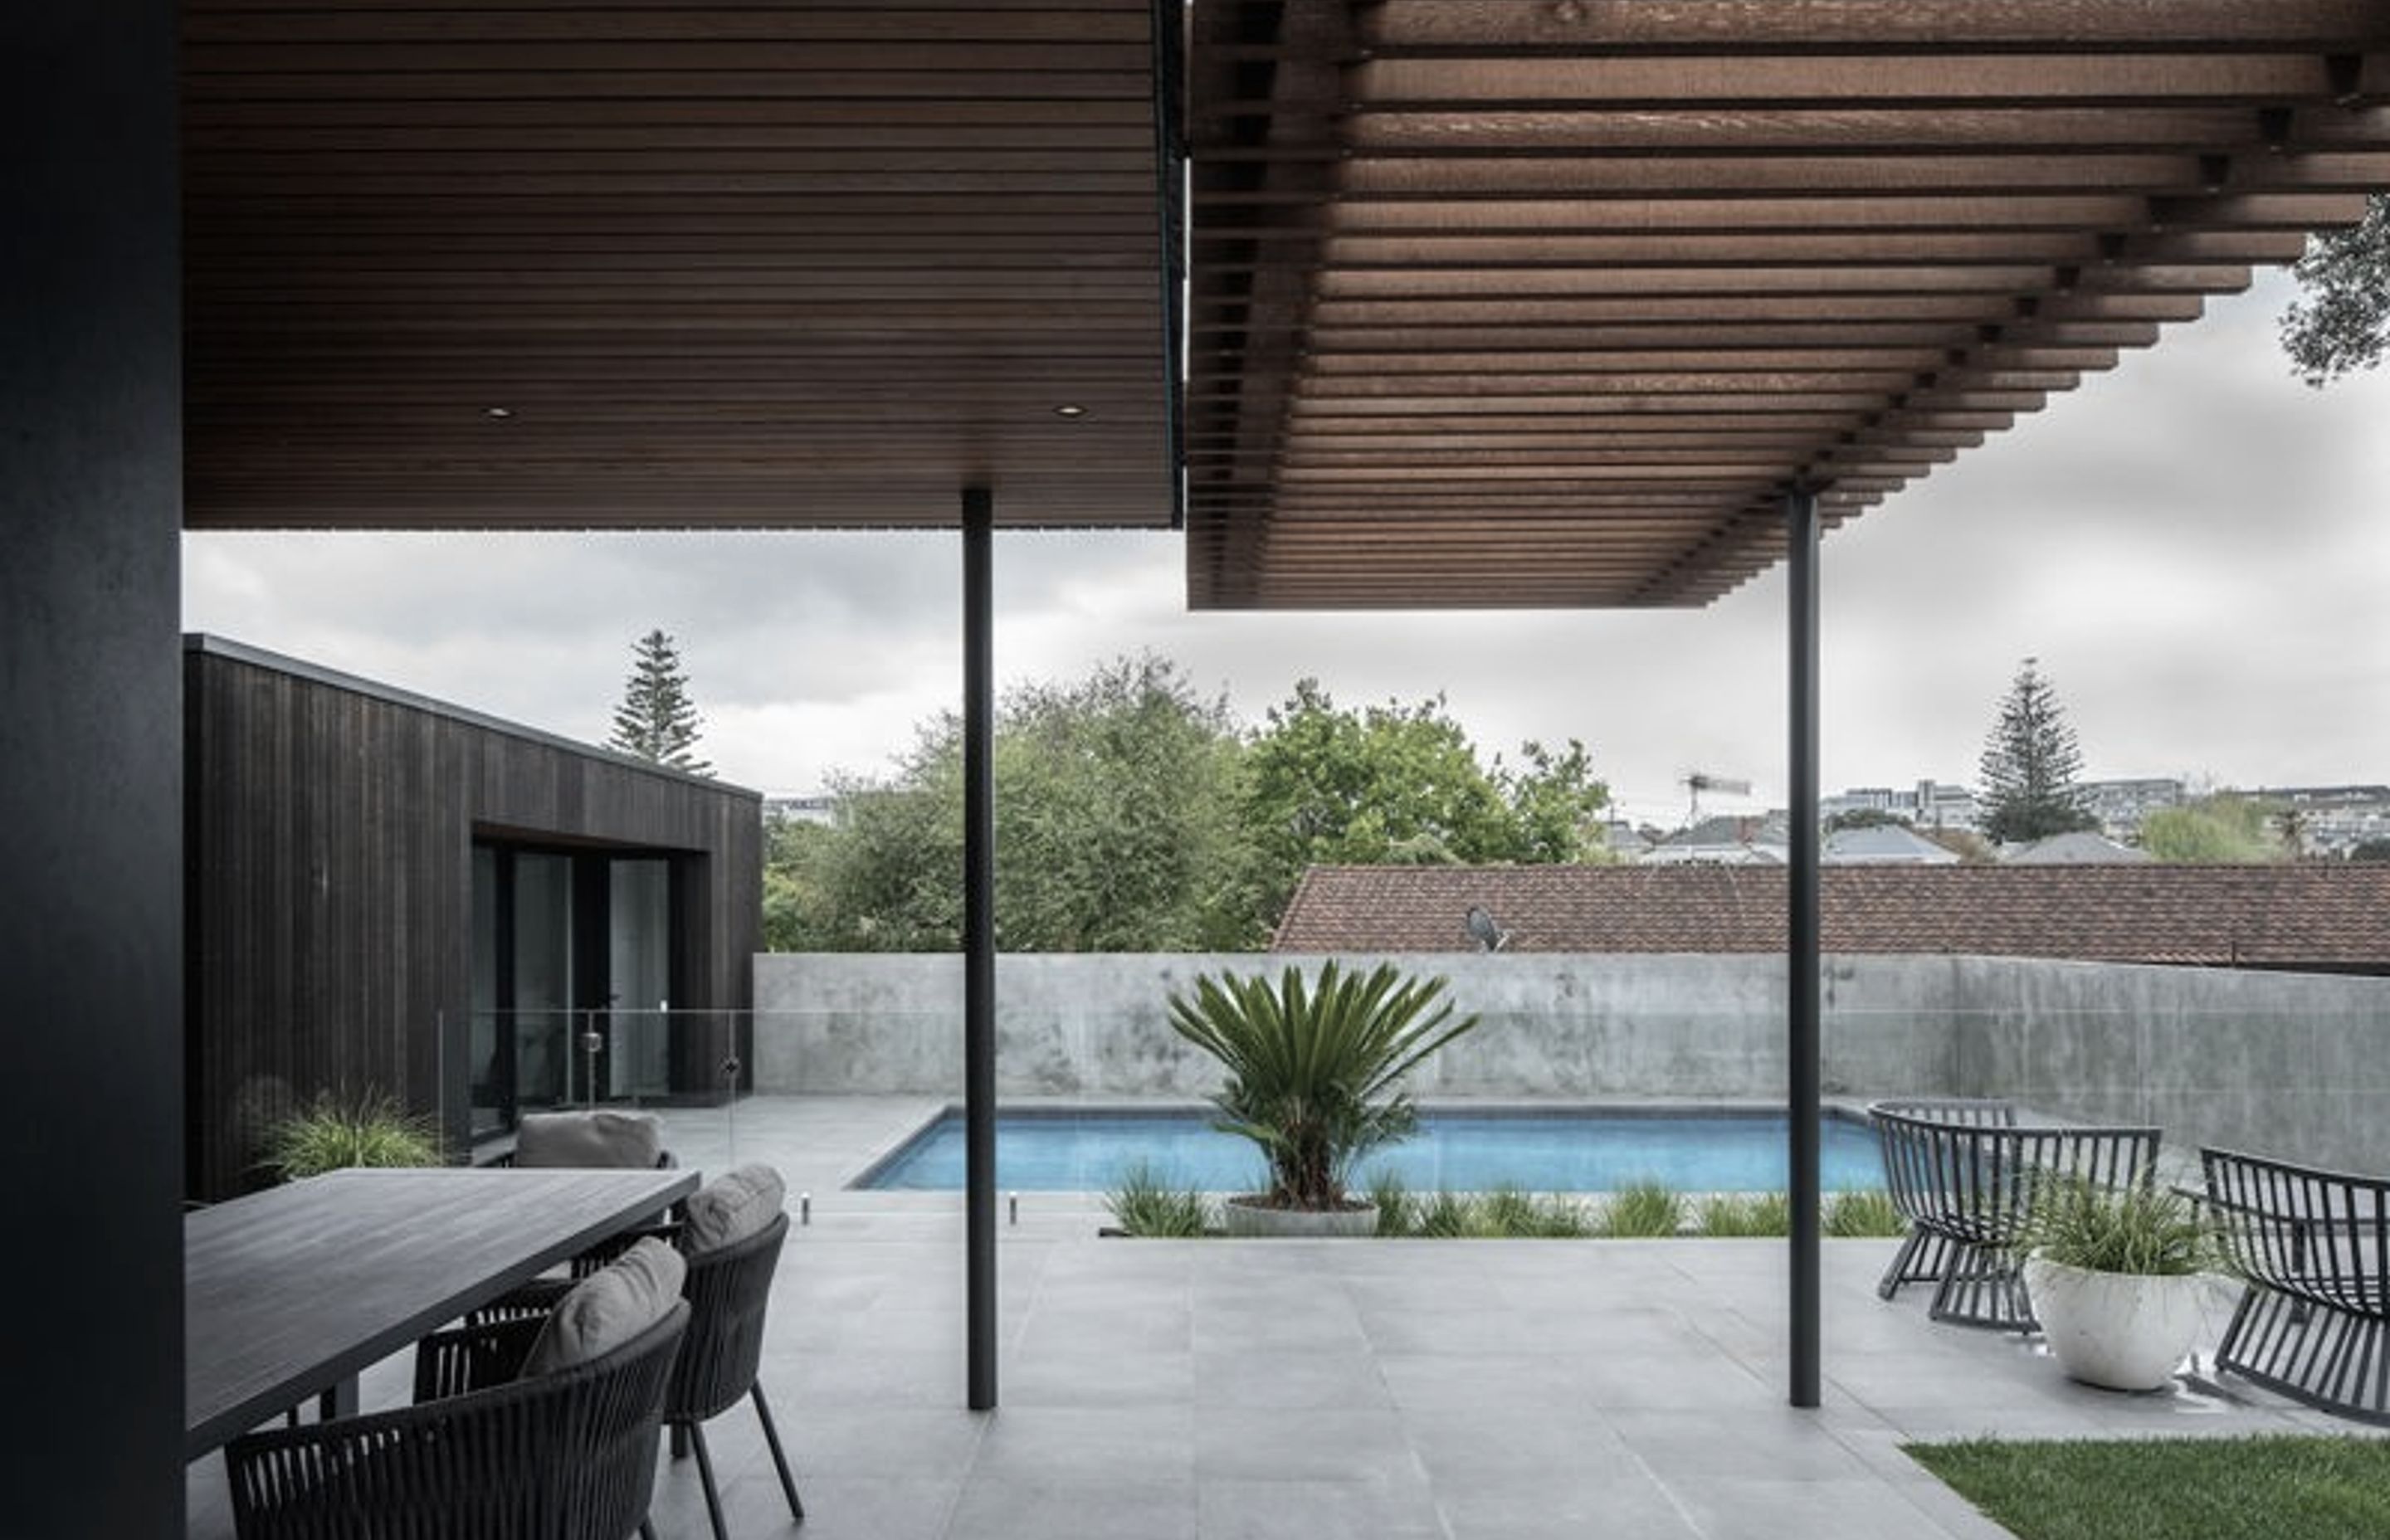 Combined, the interactionsof the new boxes with the original are contiguous and gracious as they converge around a Brutalist pool area flanked by concrete walls, glass fencing and textured grey tiles. 